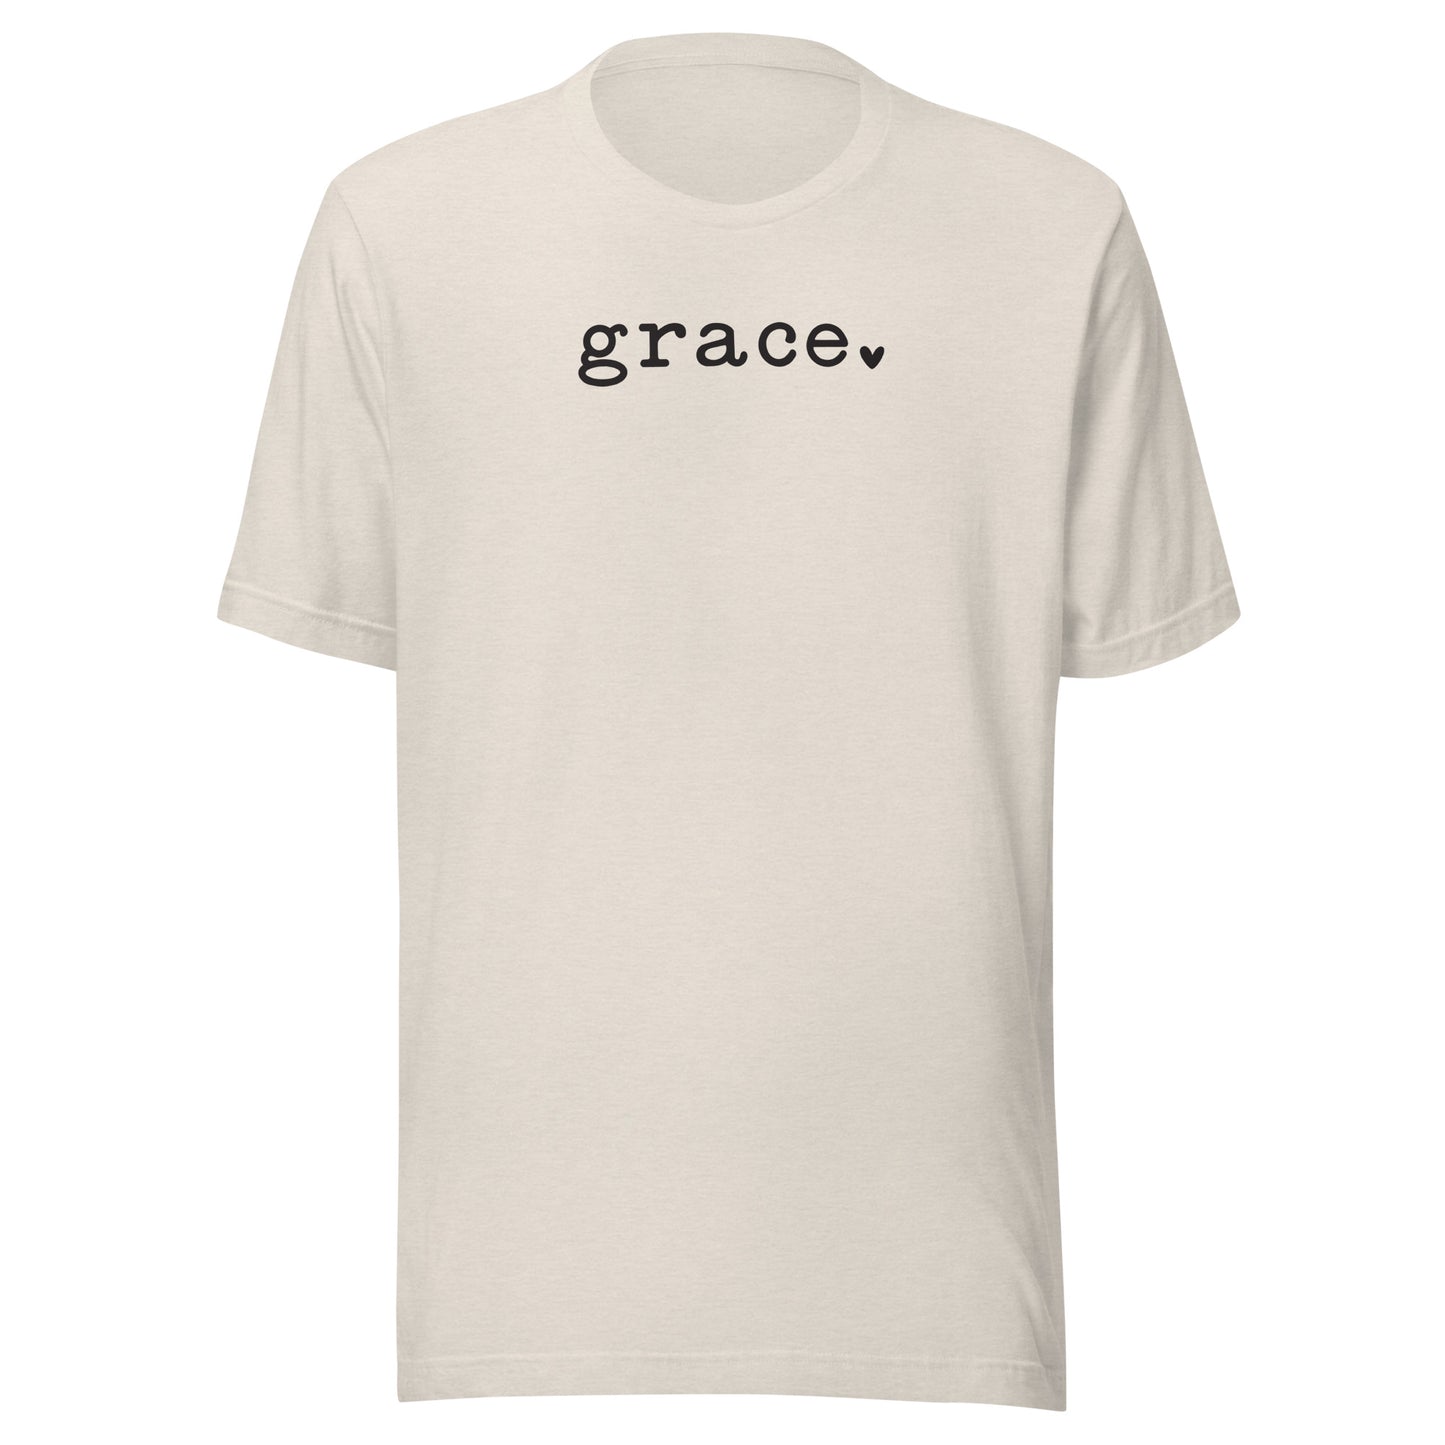 Grace T-Shirt by The Good Word Collection: Your Daily Reminder of Love and Compassion